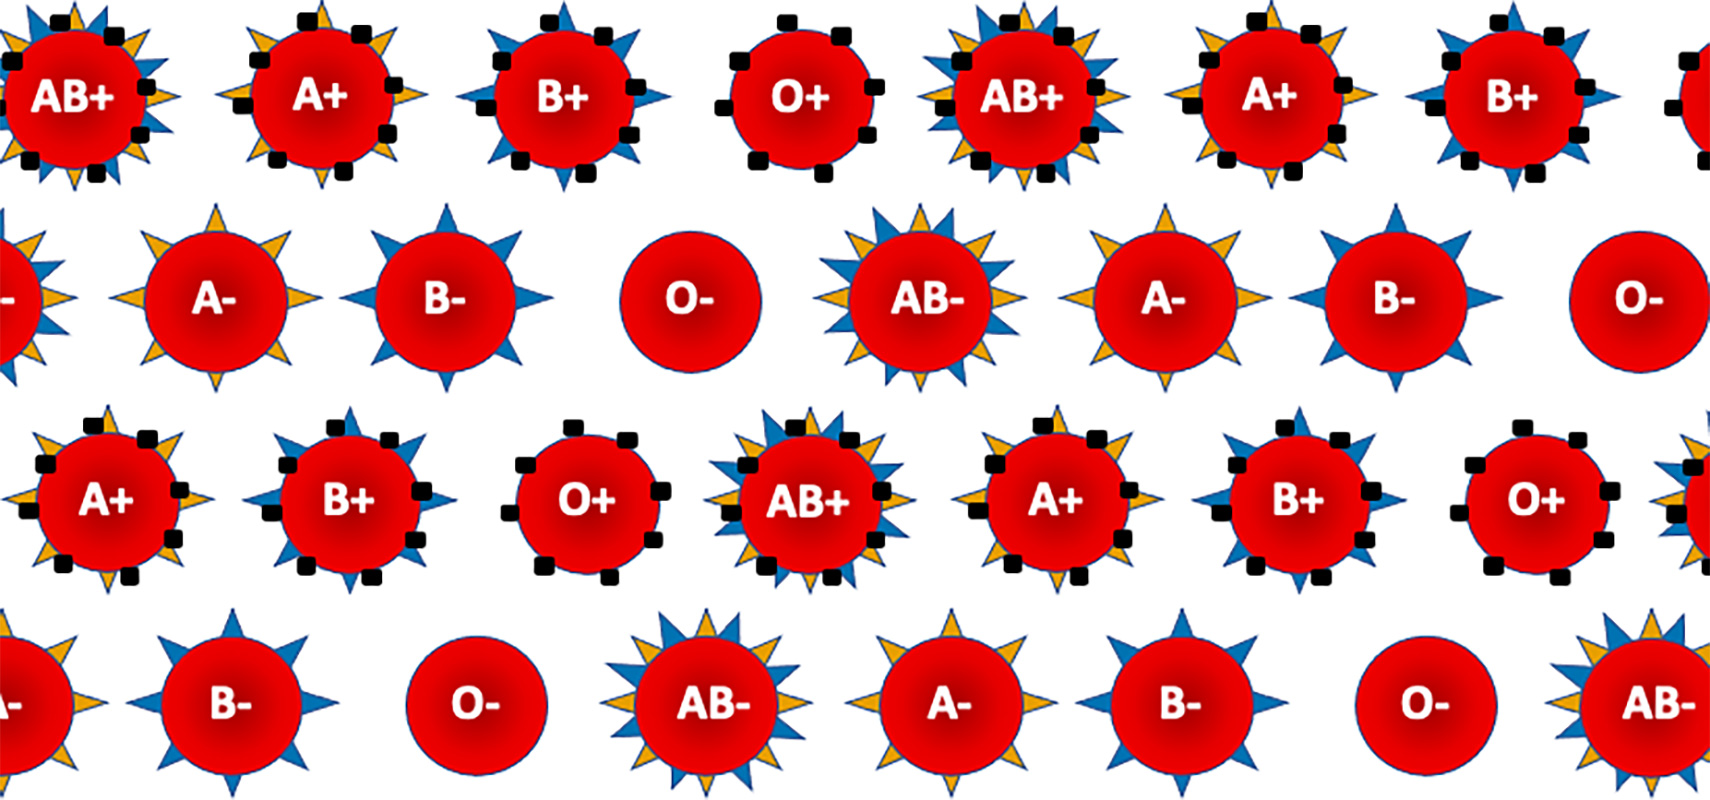 How many blood types are there? - The Tech Interactive